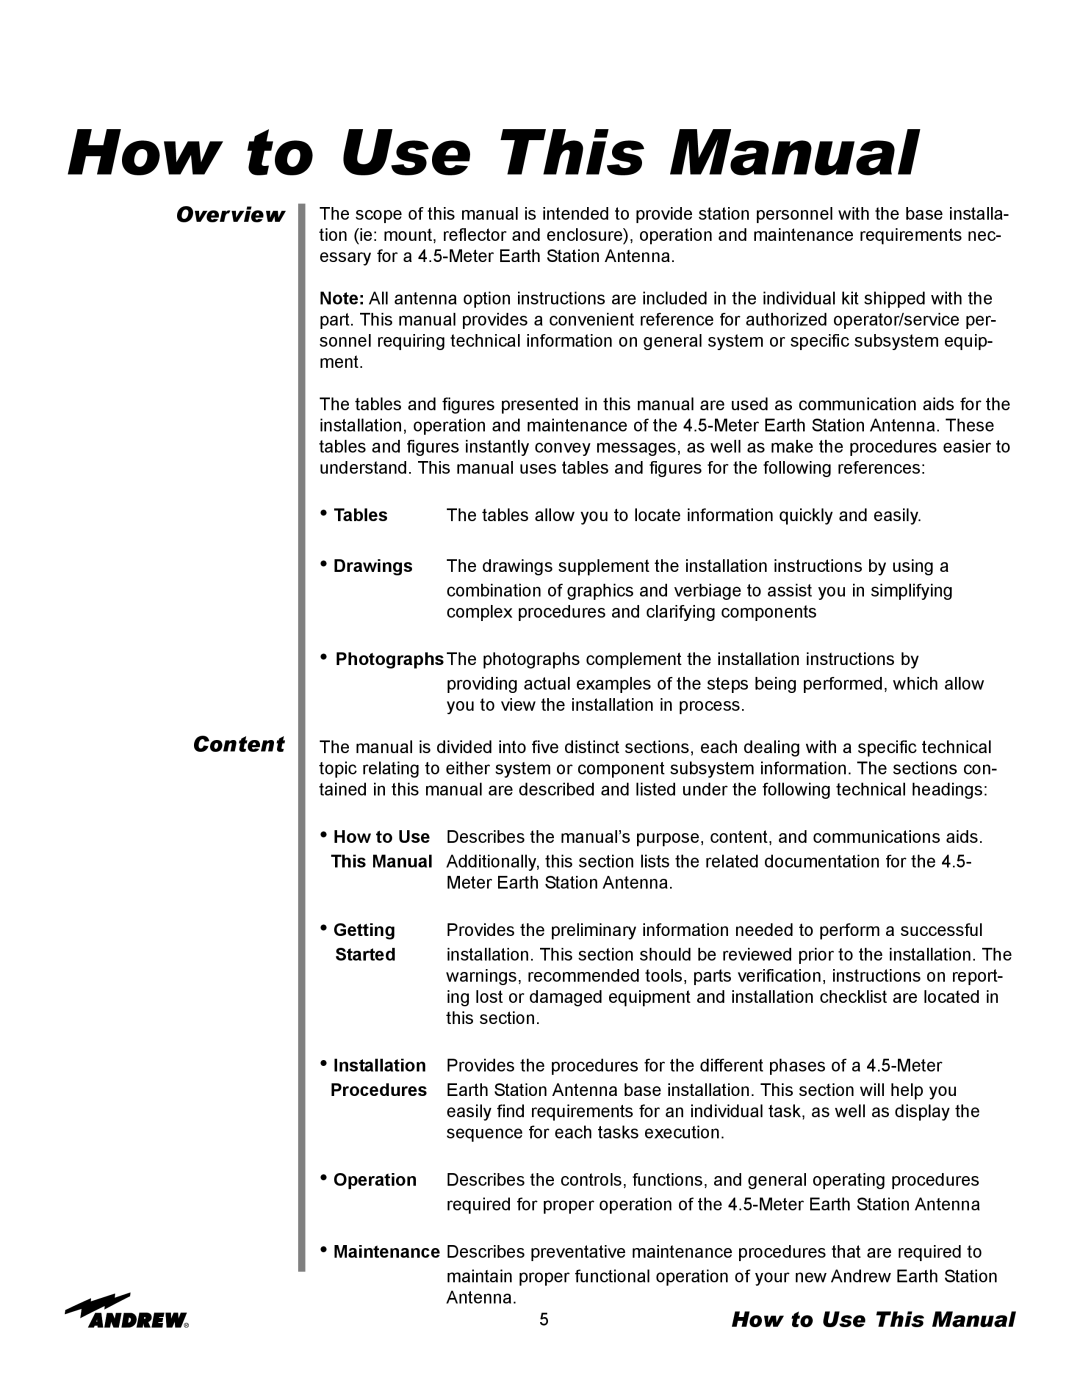 Andrew ES45T manual How to Use This Manual, Overview Content 